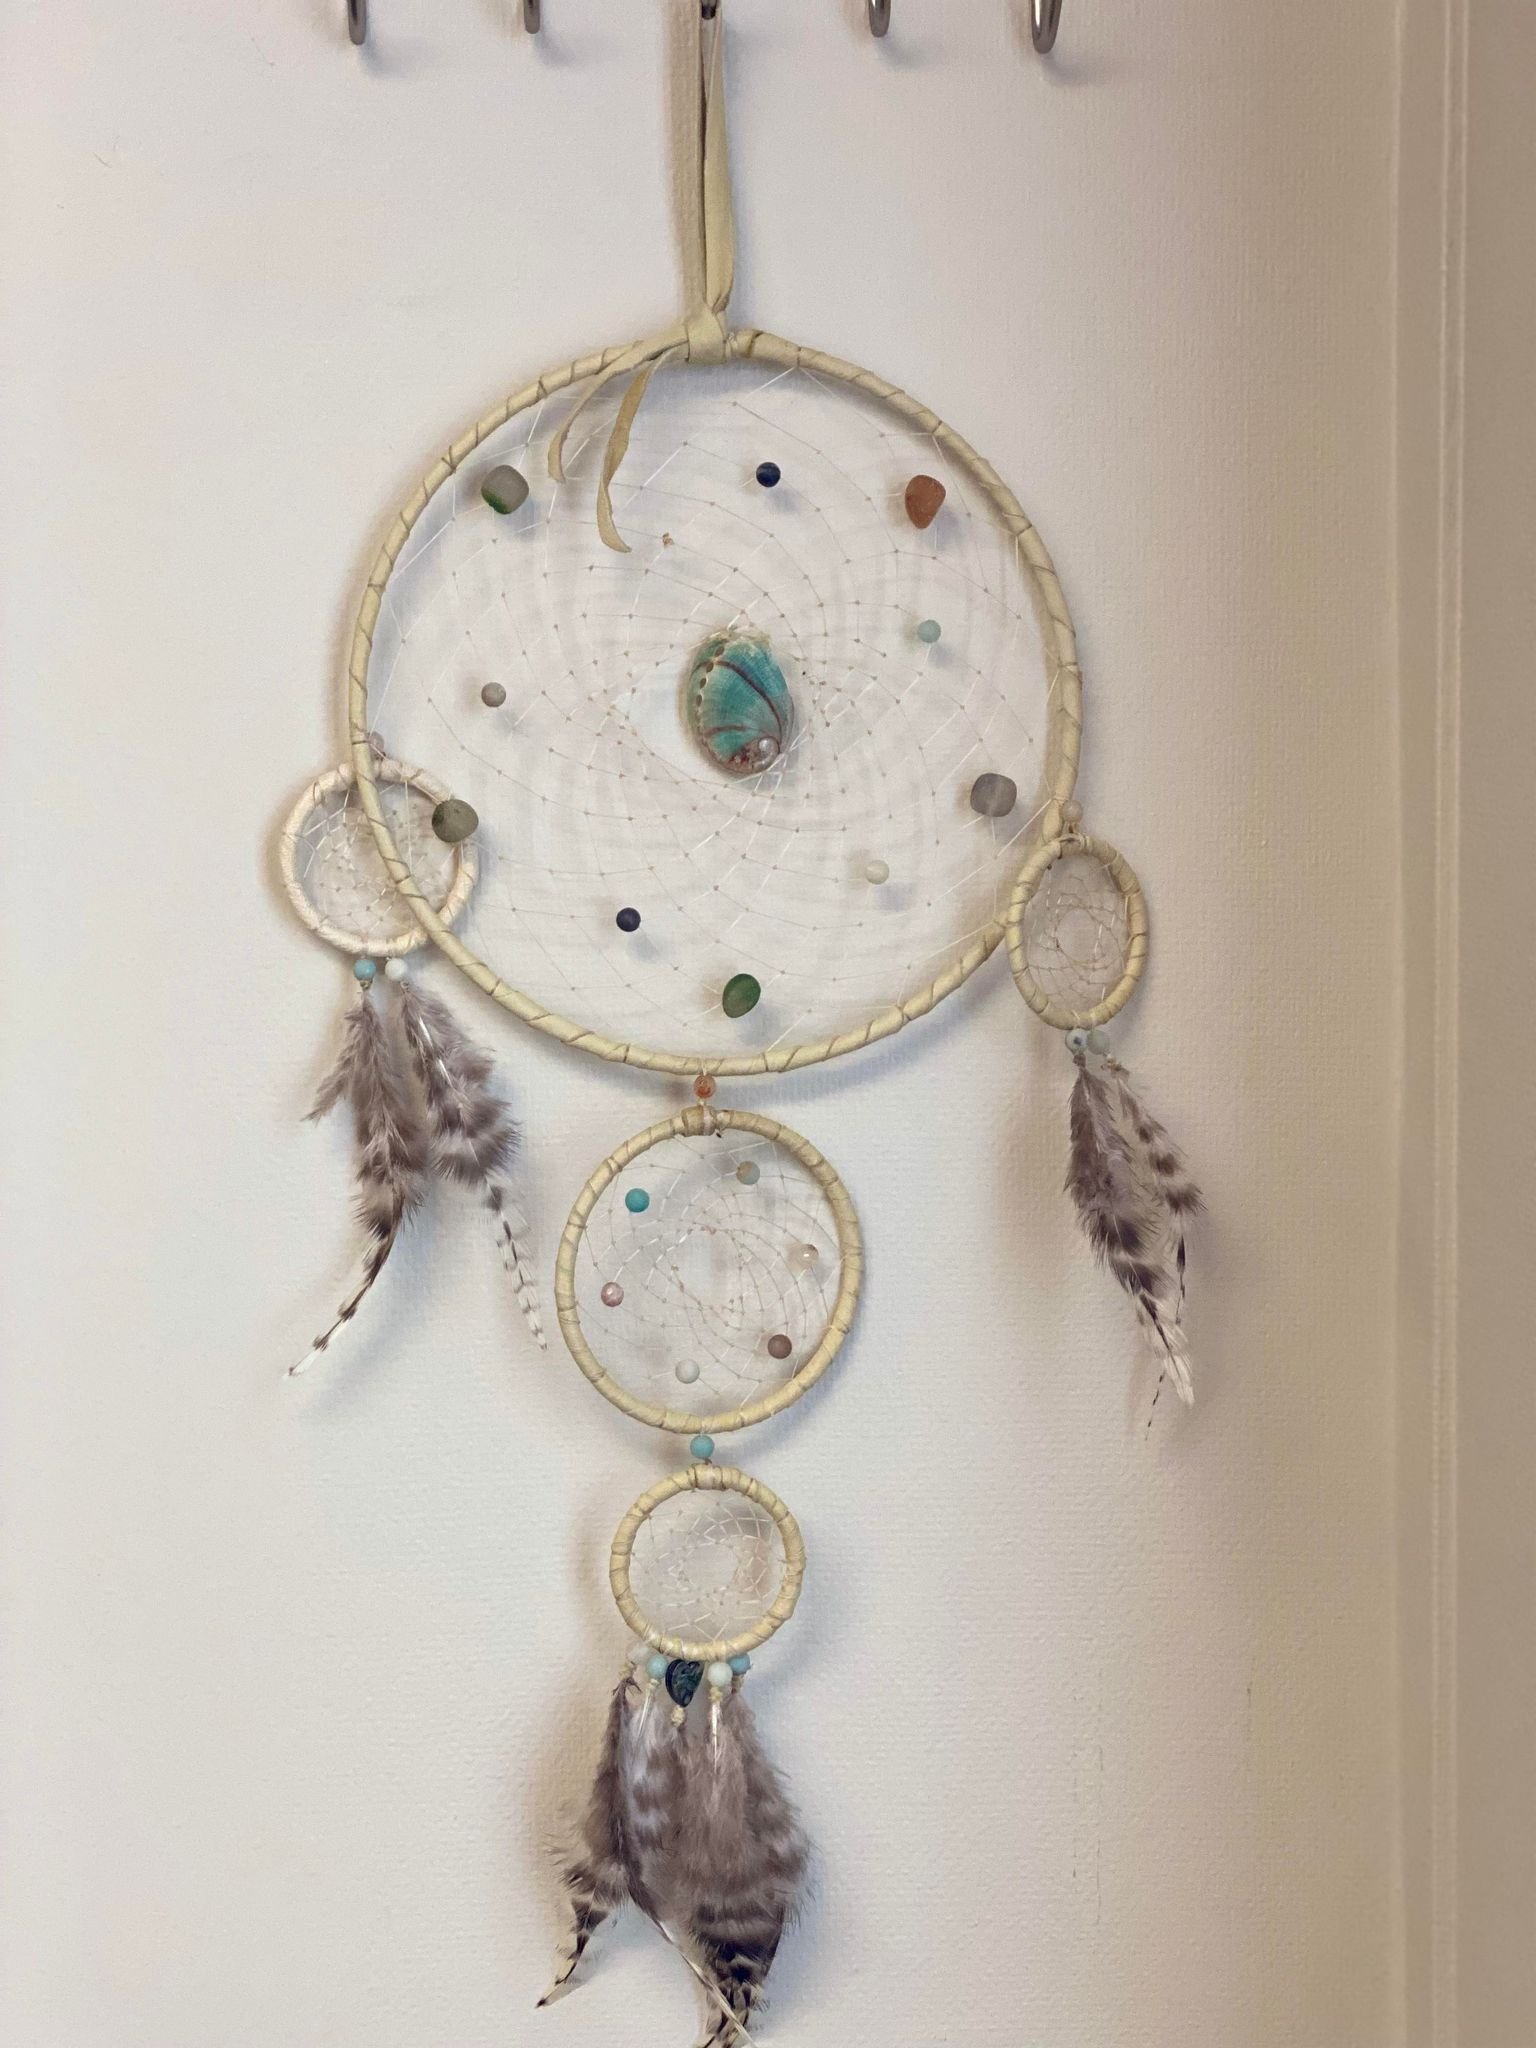 Julie Perry crafted these gorgeous dreamcatchers for ARC